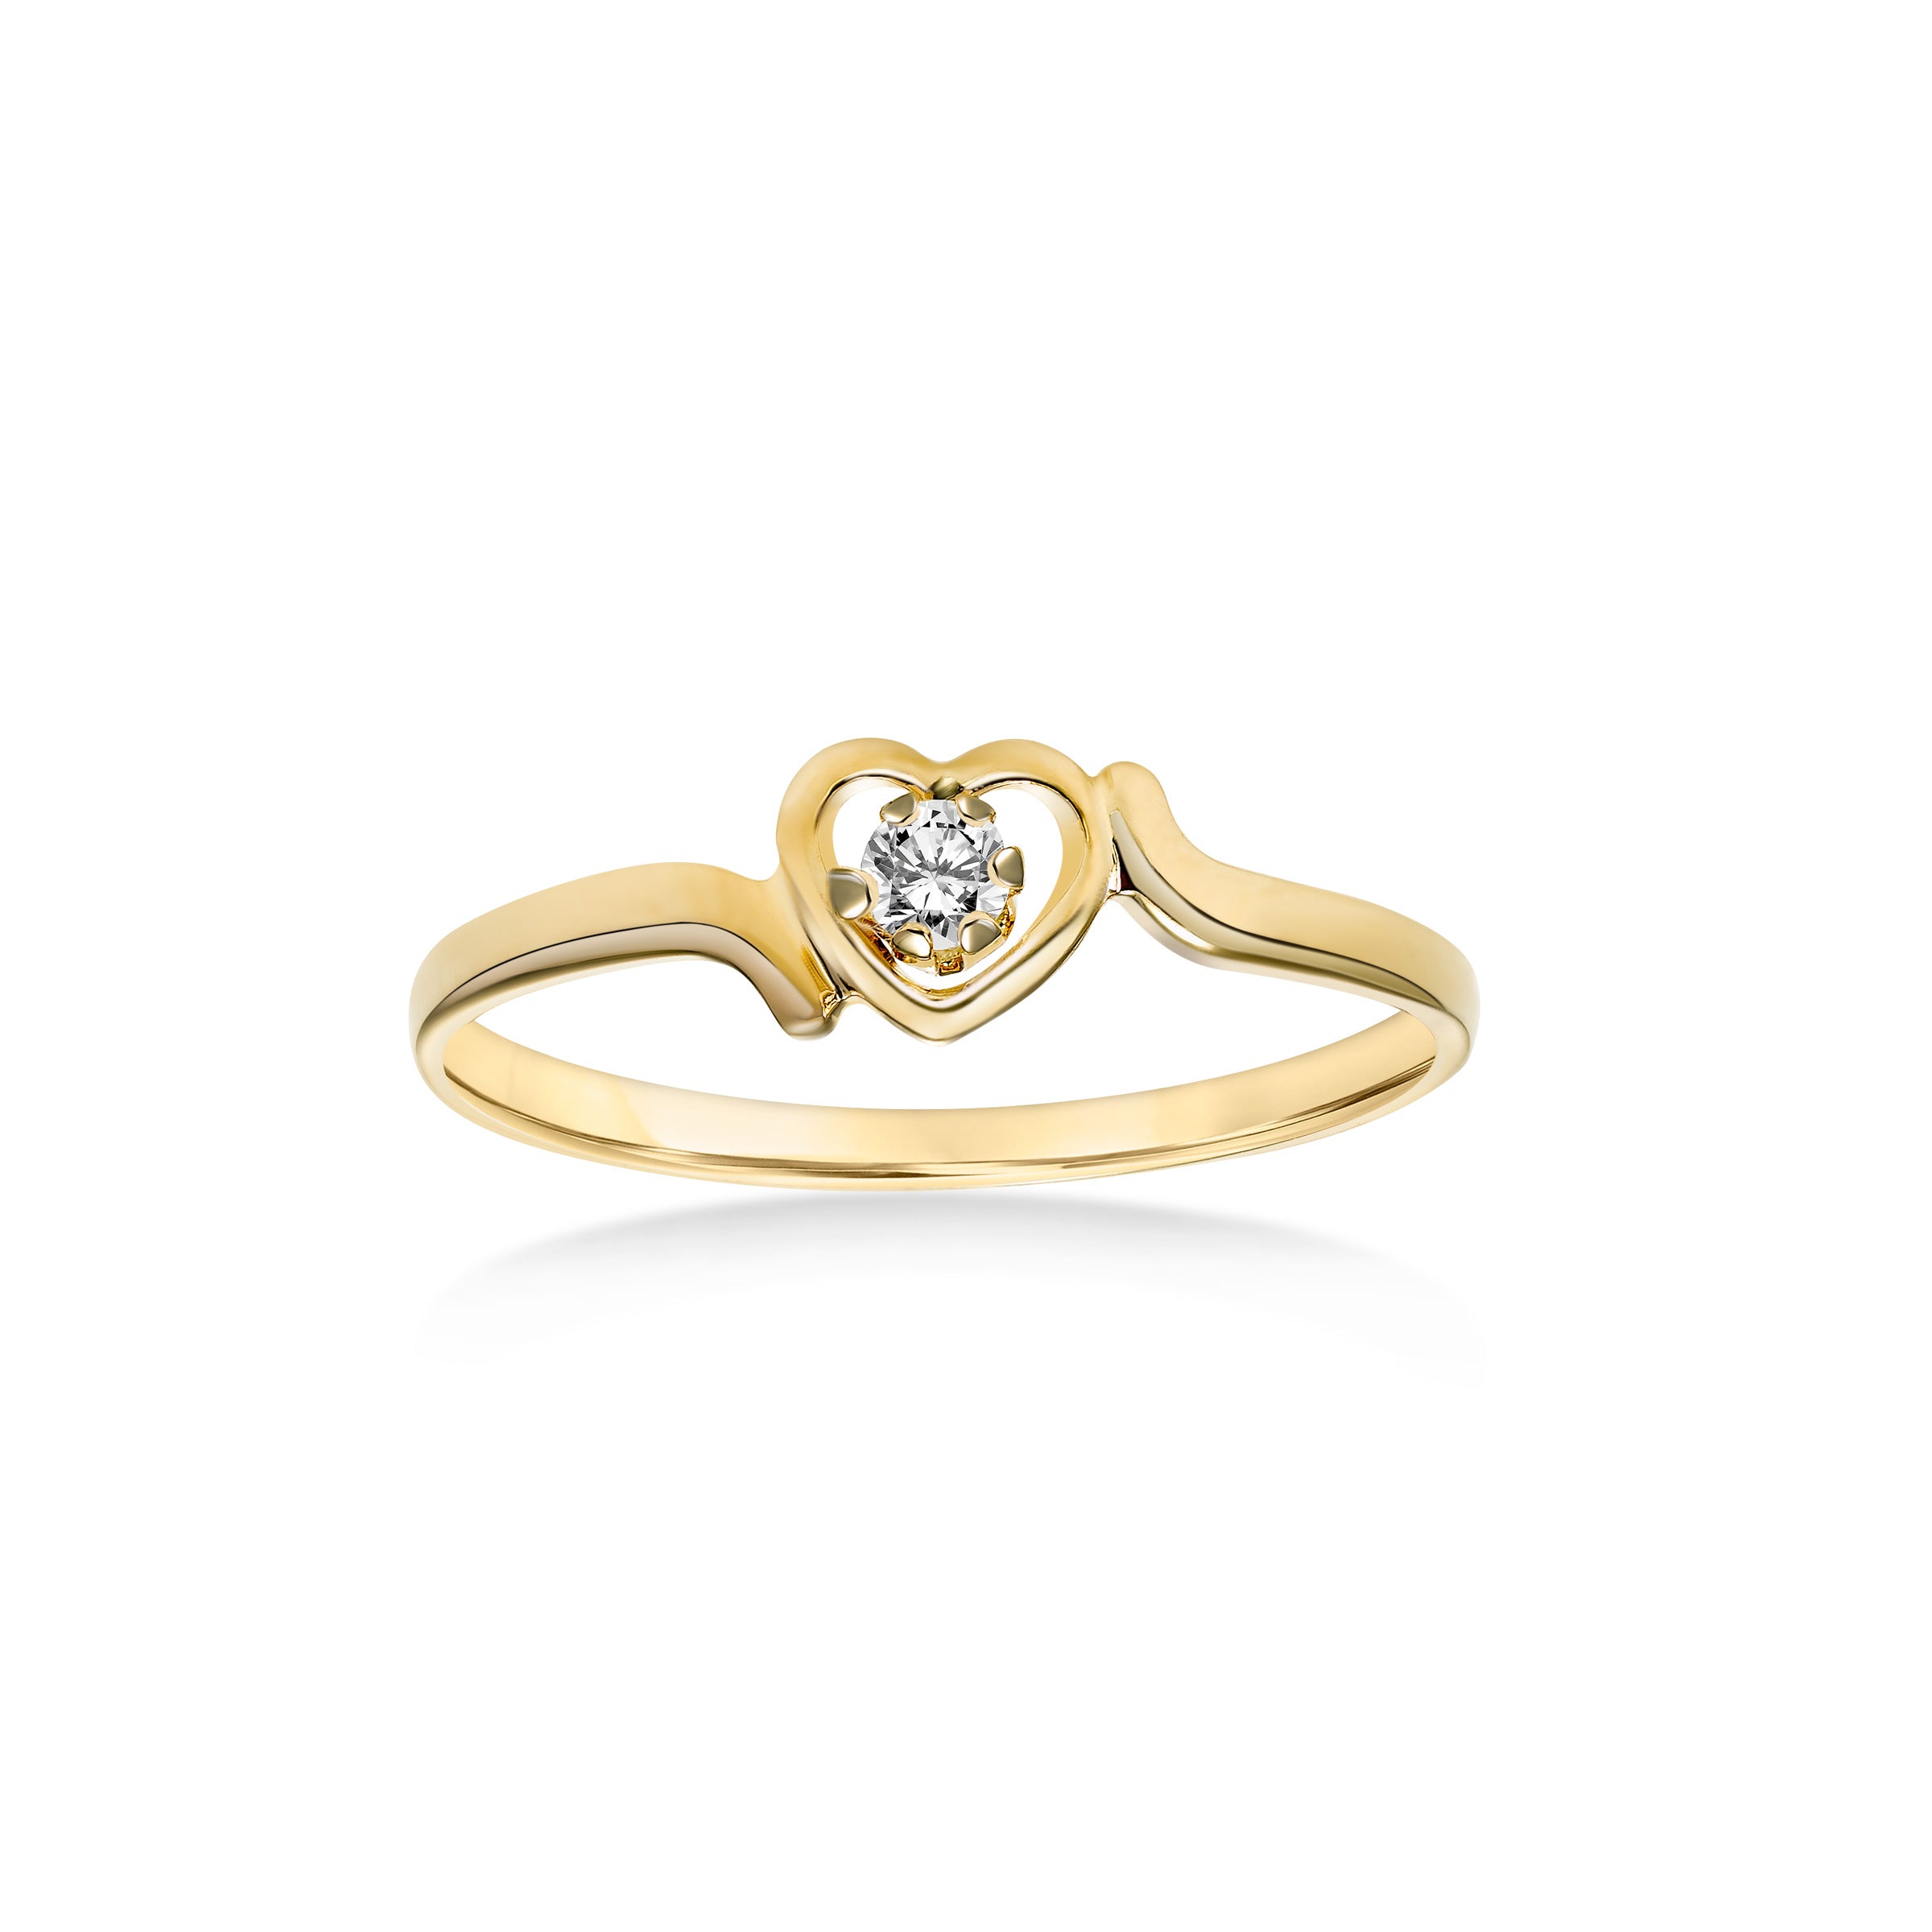 Heart Design Ring with Diamond Center, 14K Yellow Gold